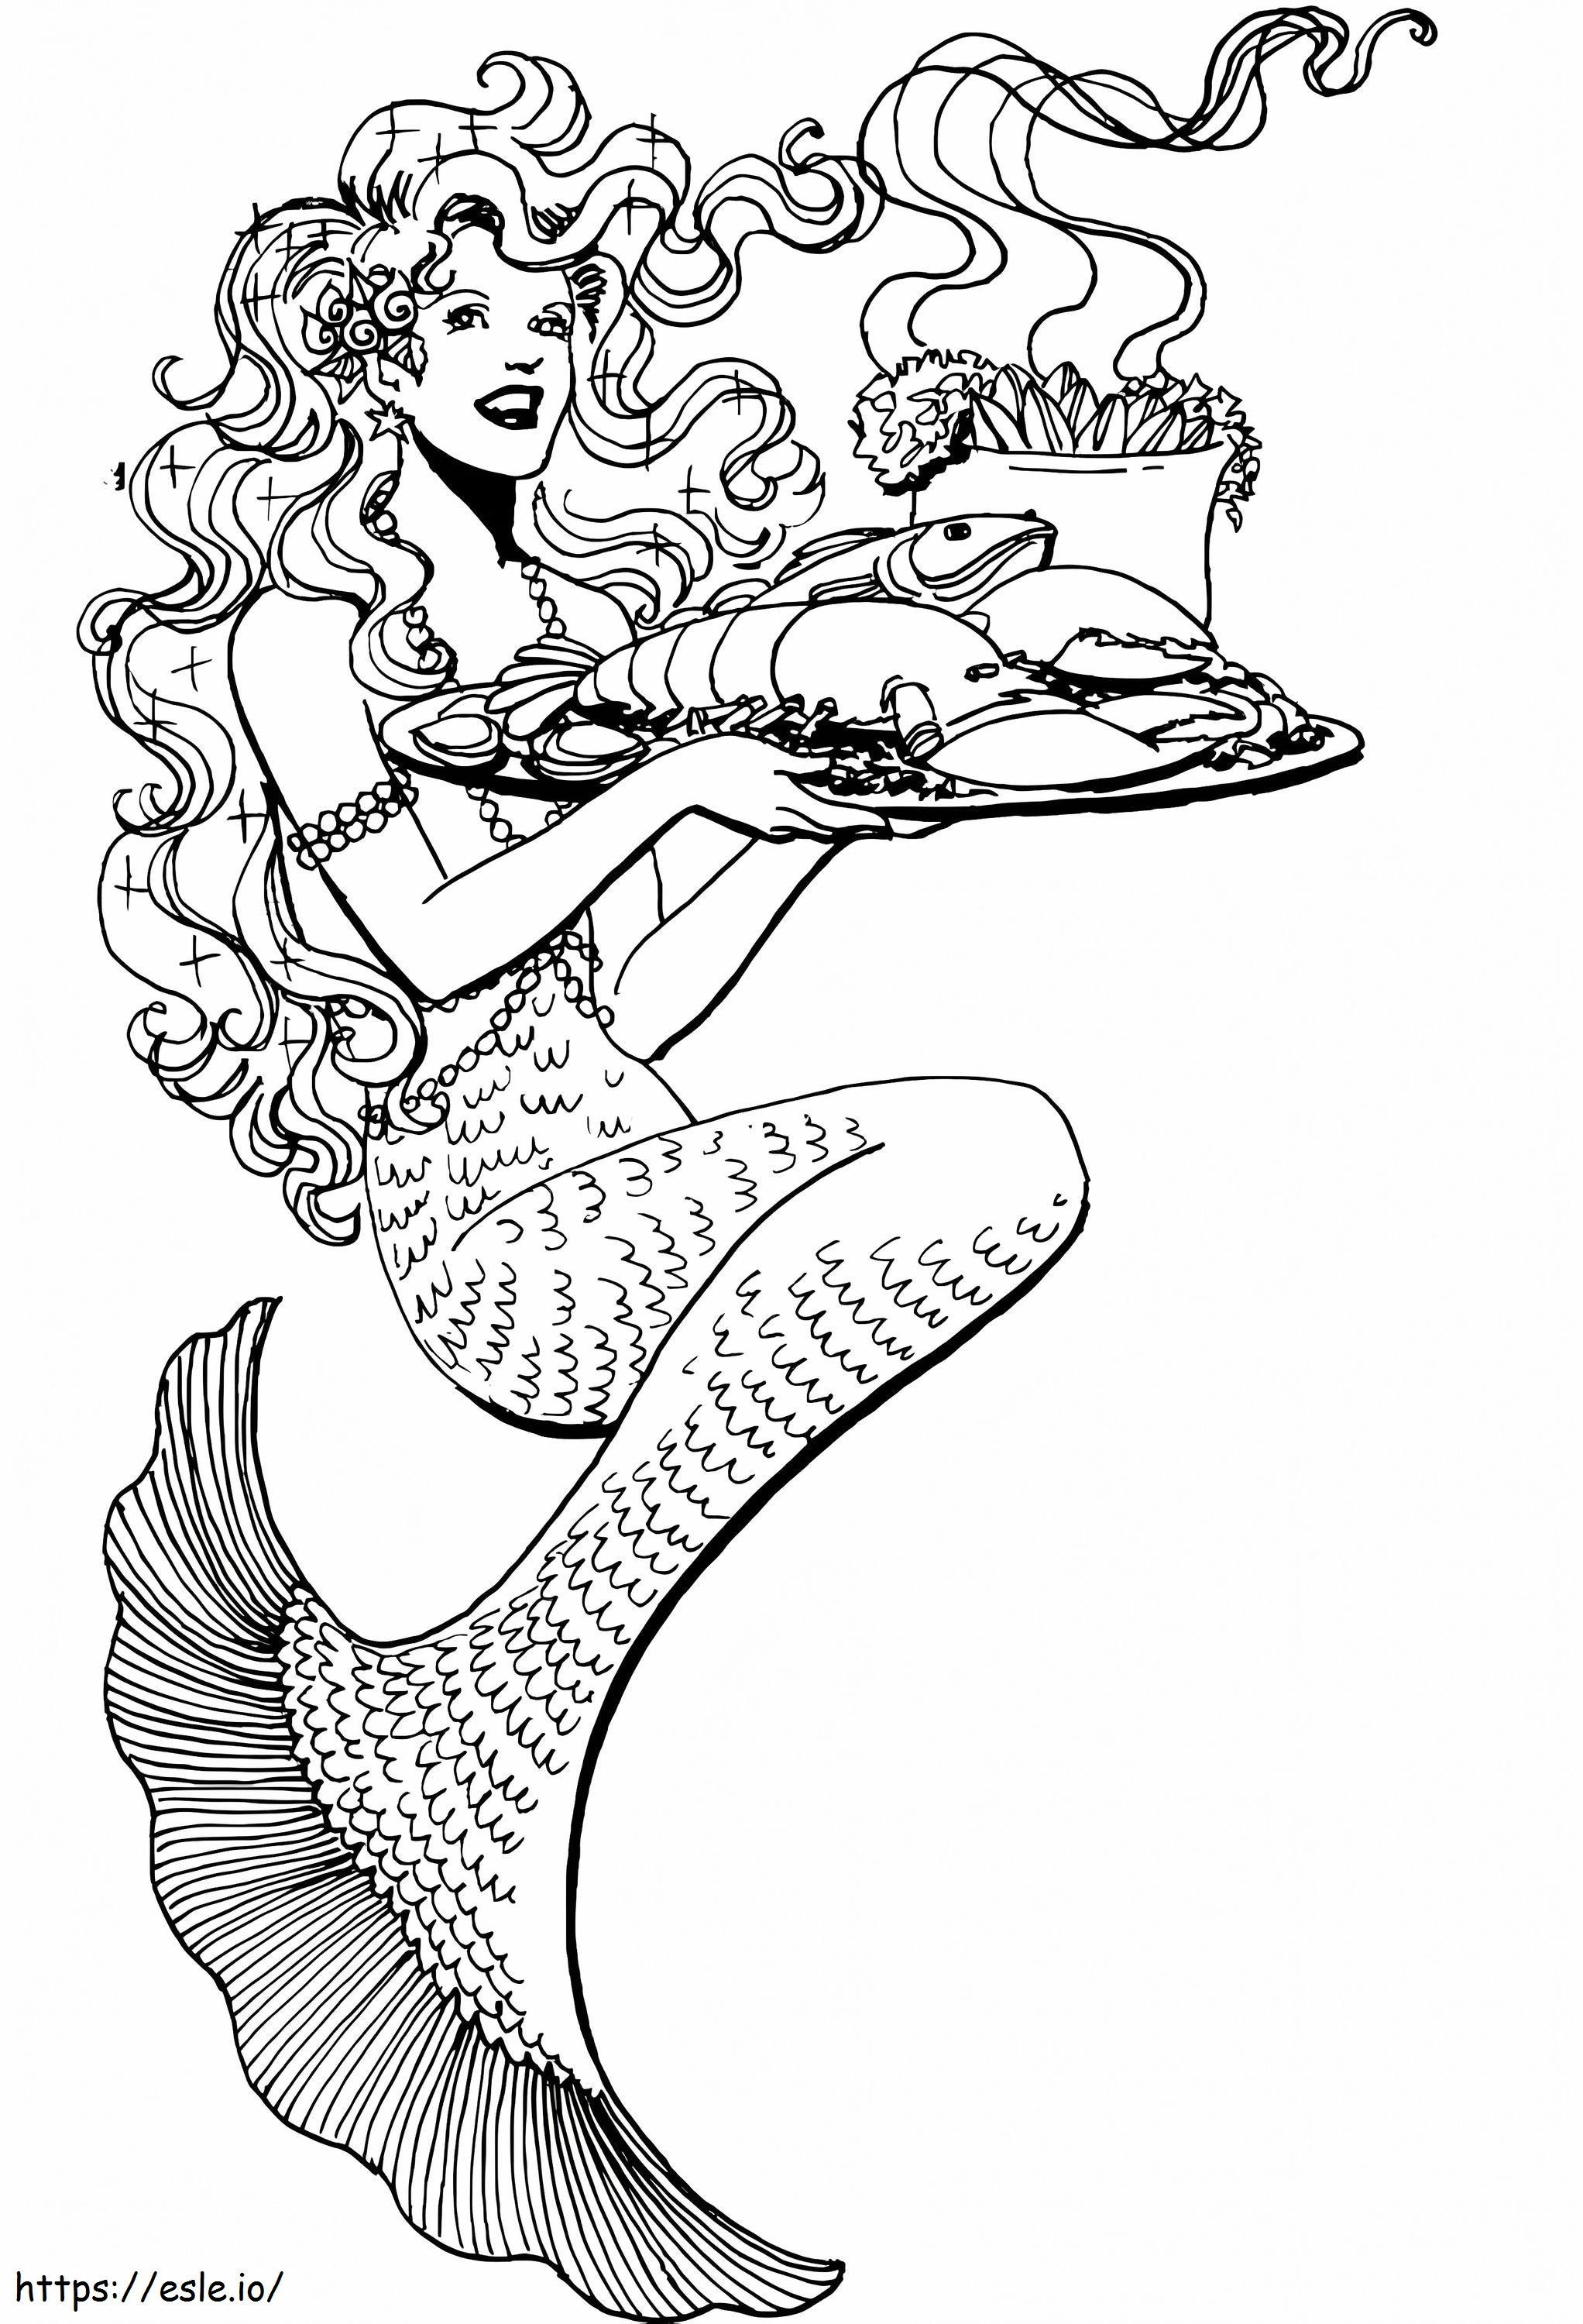 Mermaid And Foods coloring page